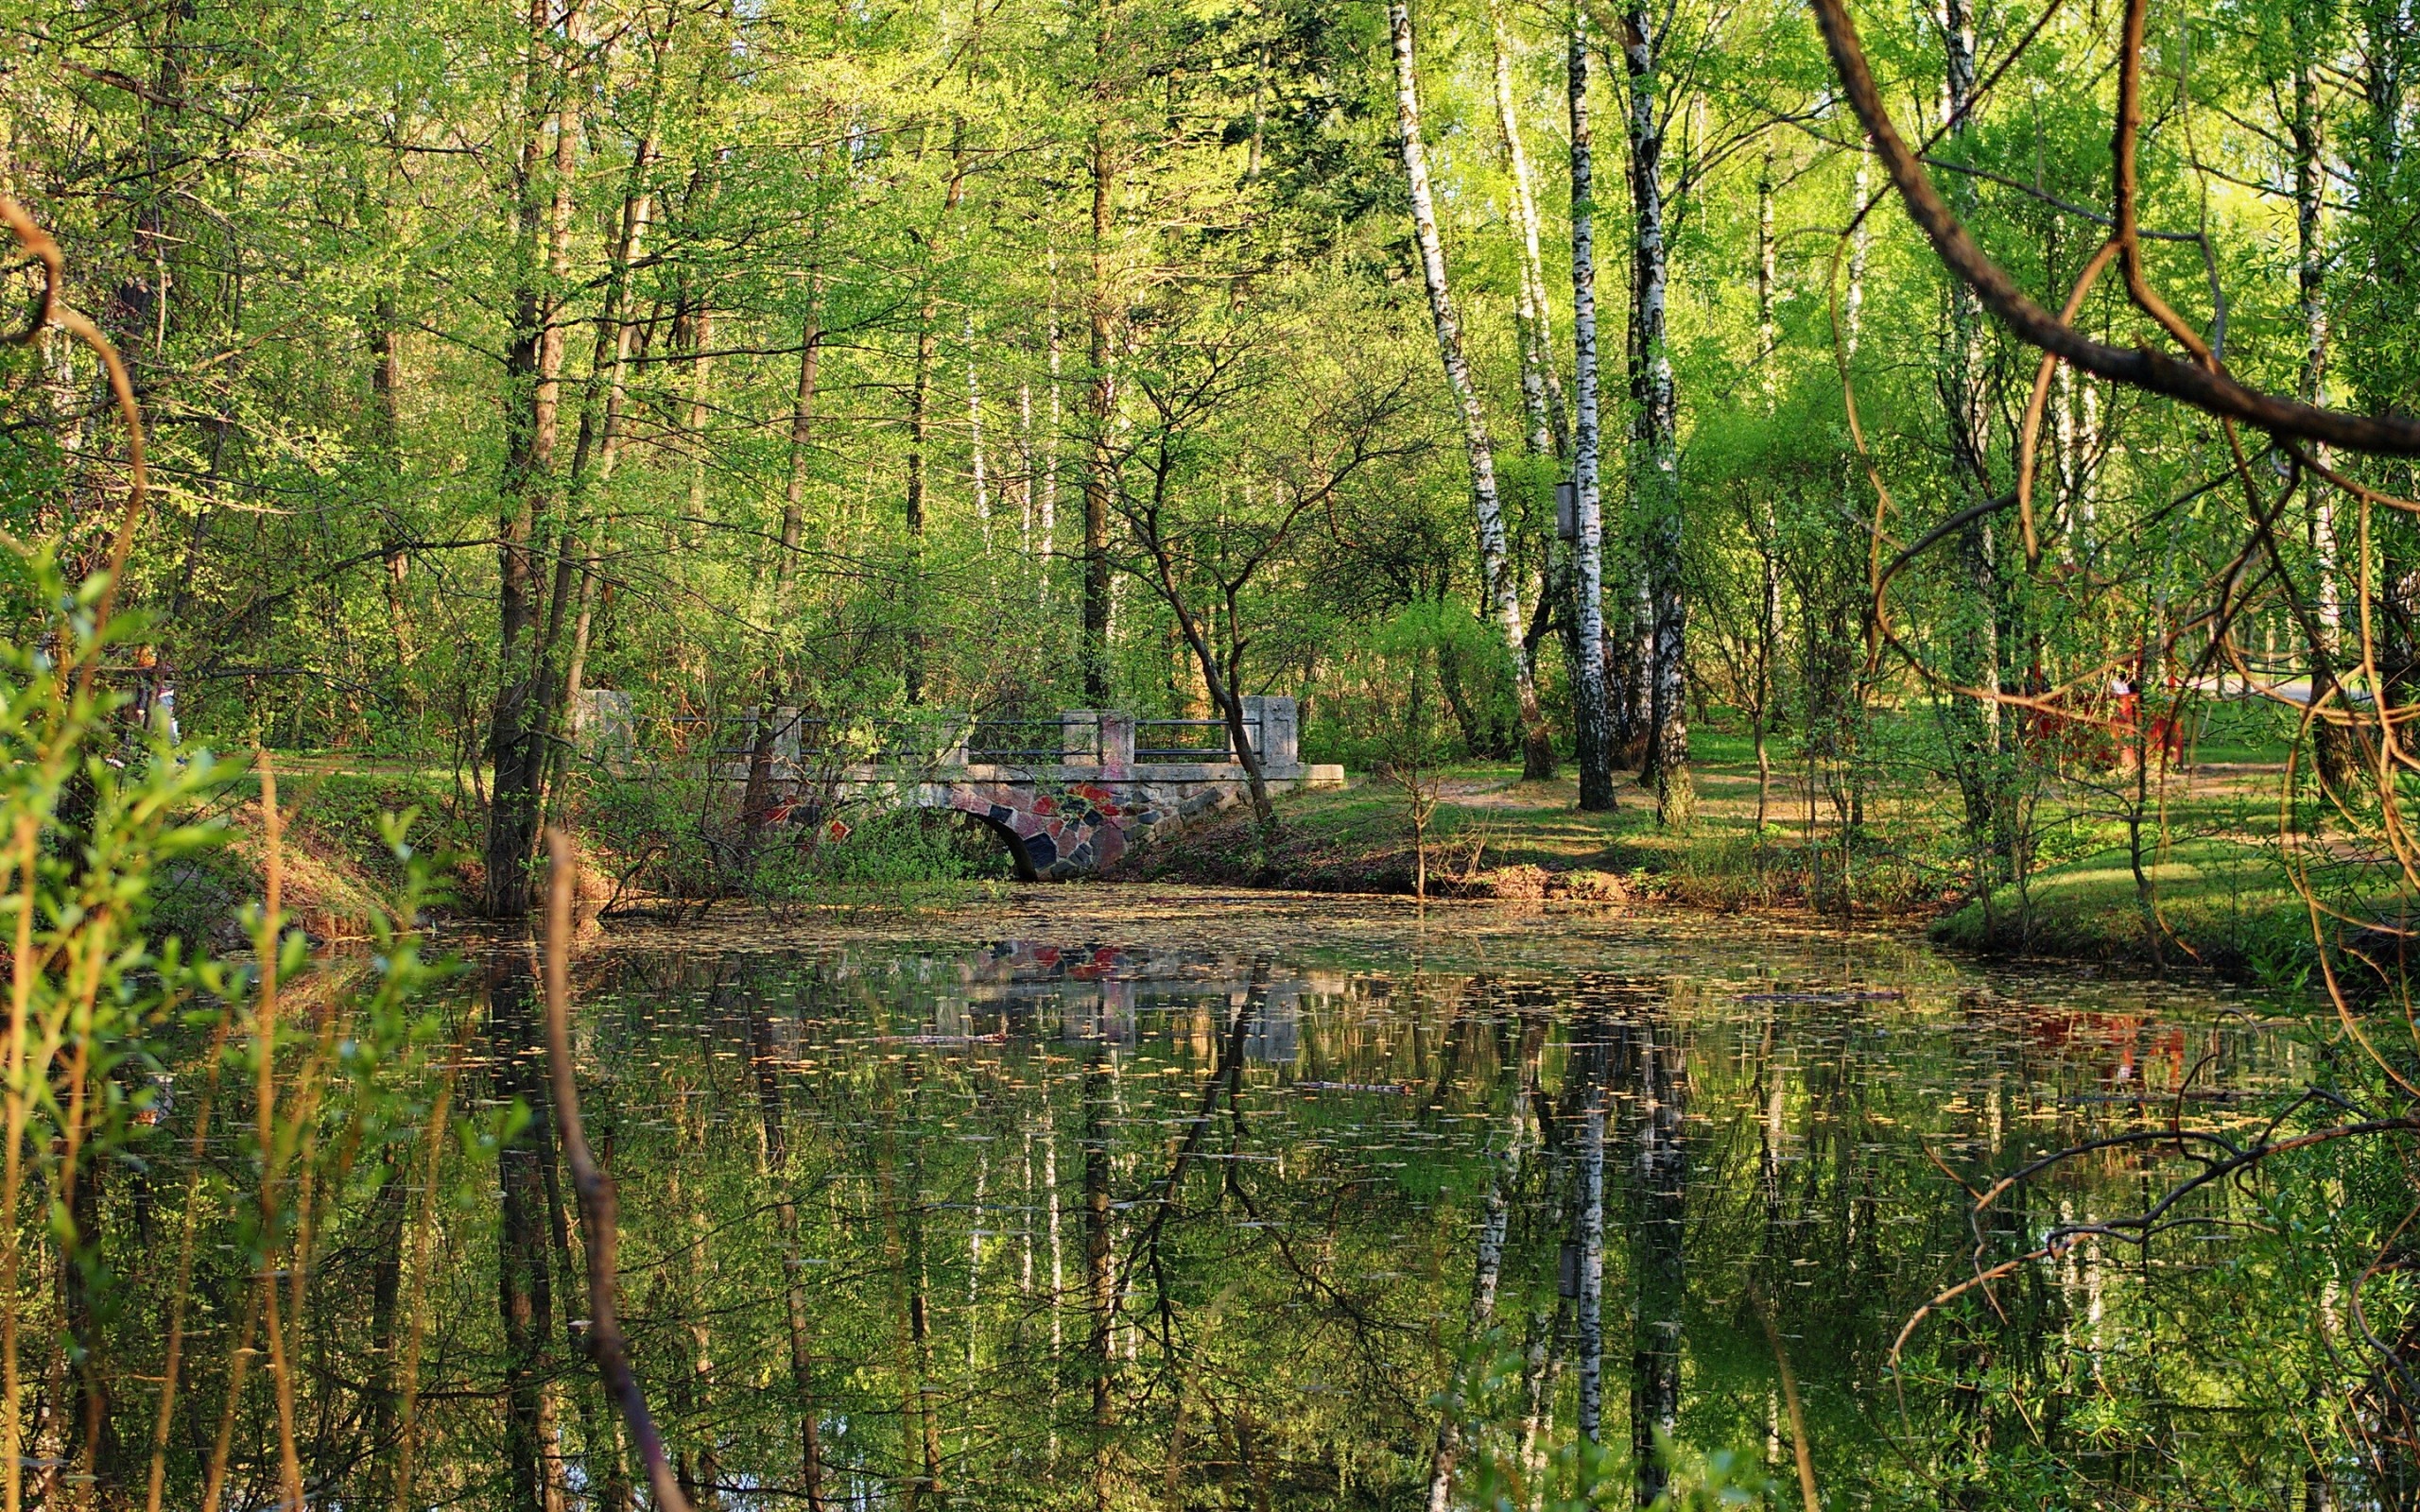 General 2560x1600 nature forest pond outdoors water trees reflection